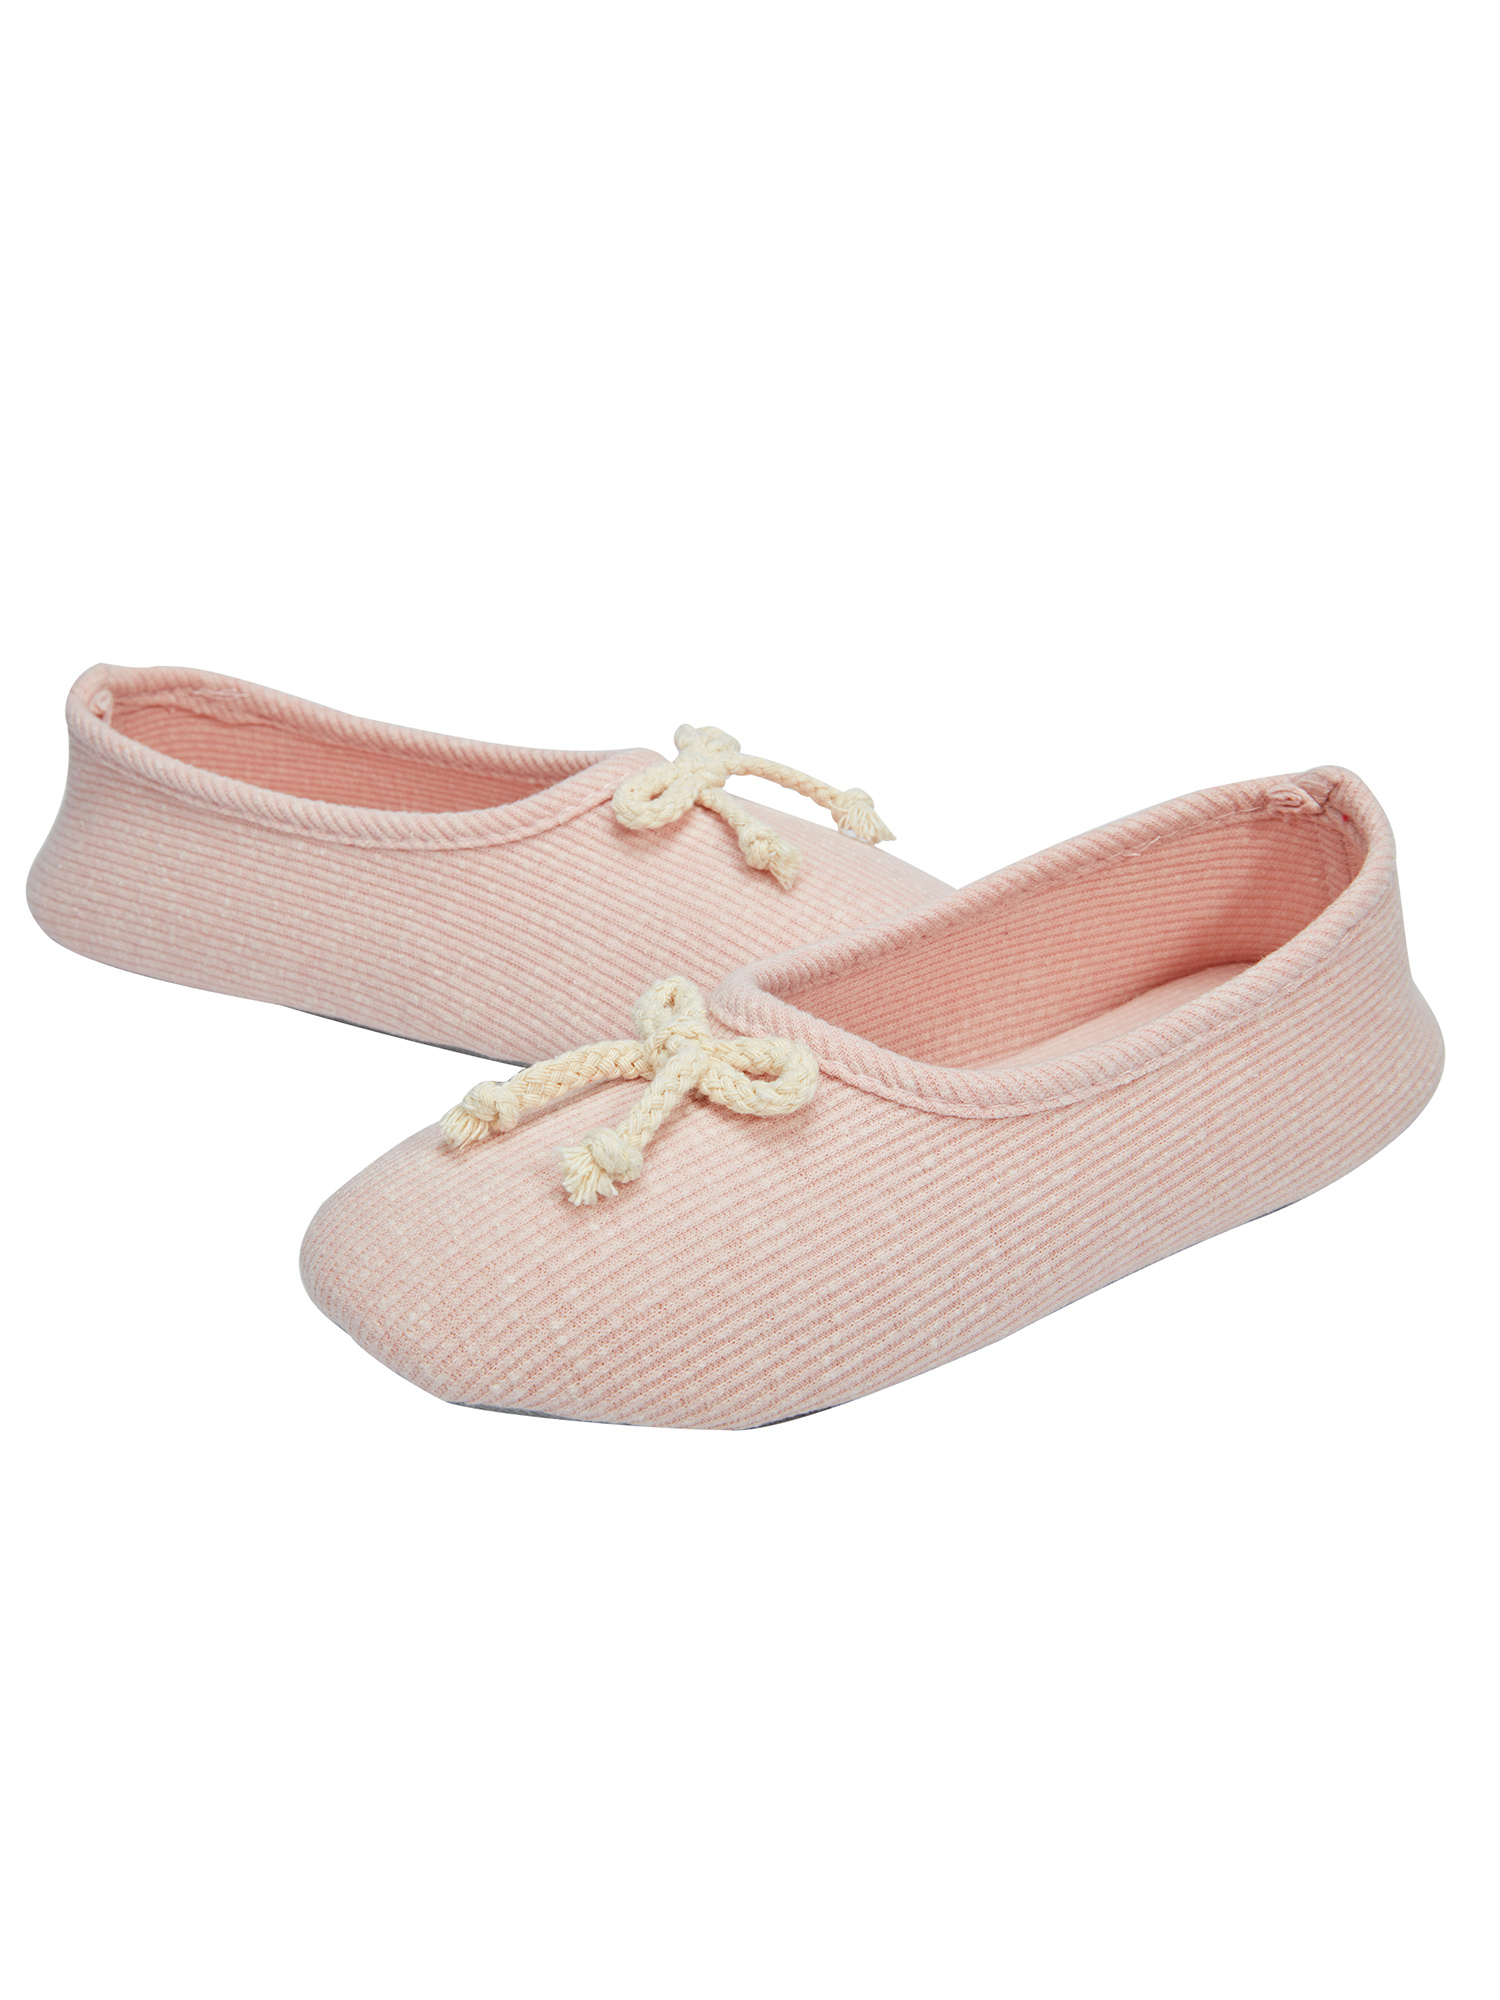 SAYFUT Women's Cotton Ballerina Slippers, Lightweight House Shoes with Cute Bow and Indoor Anti-Skid Soft Rubber Sole Round Toe Loafers Shoes - image 2 of 8